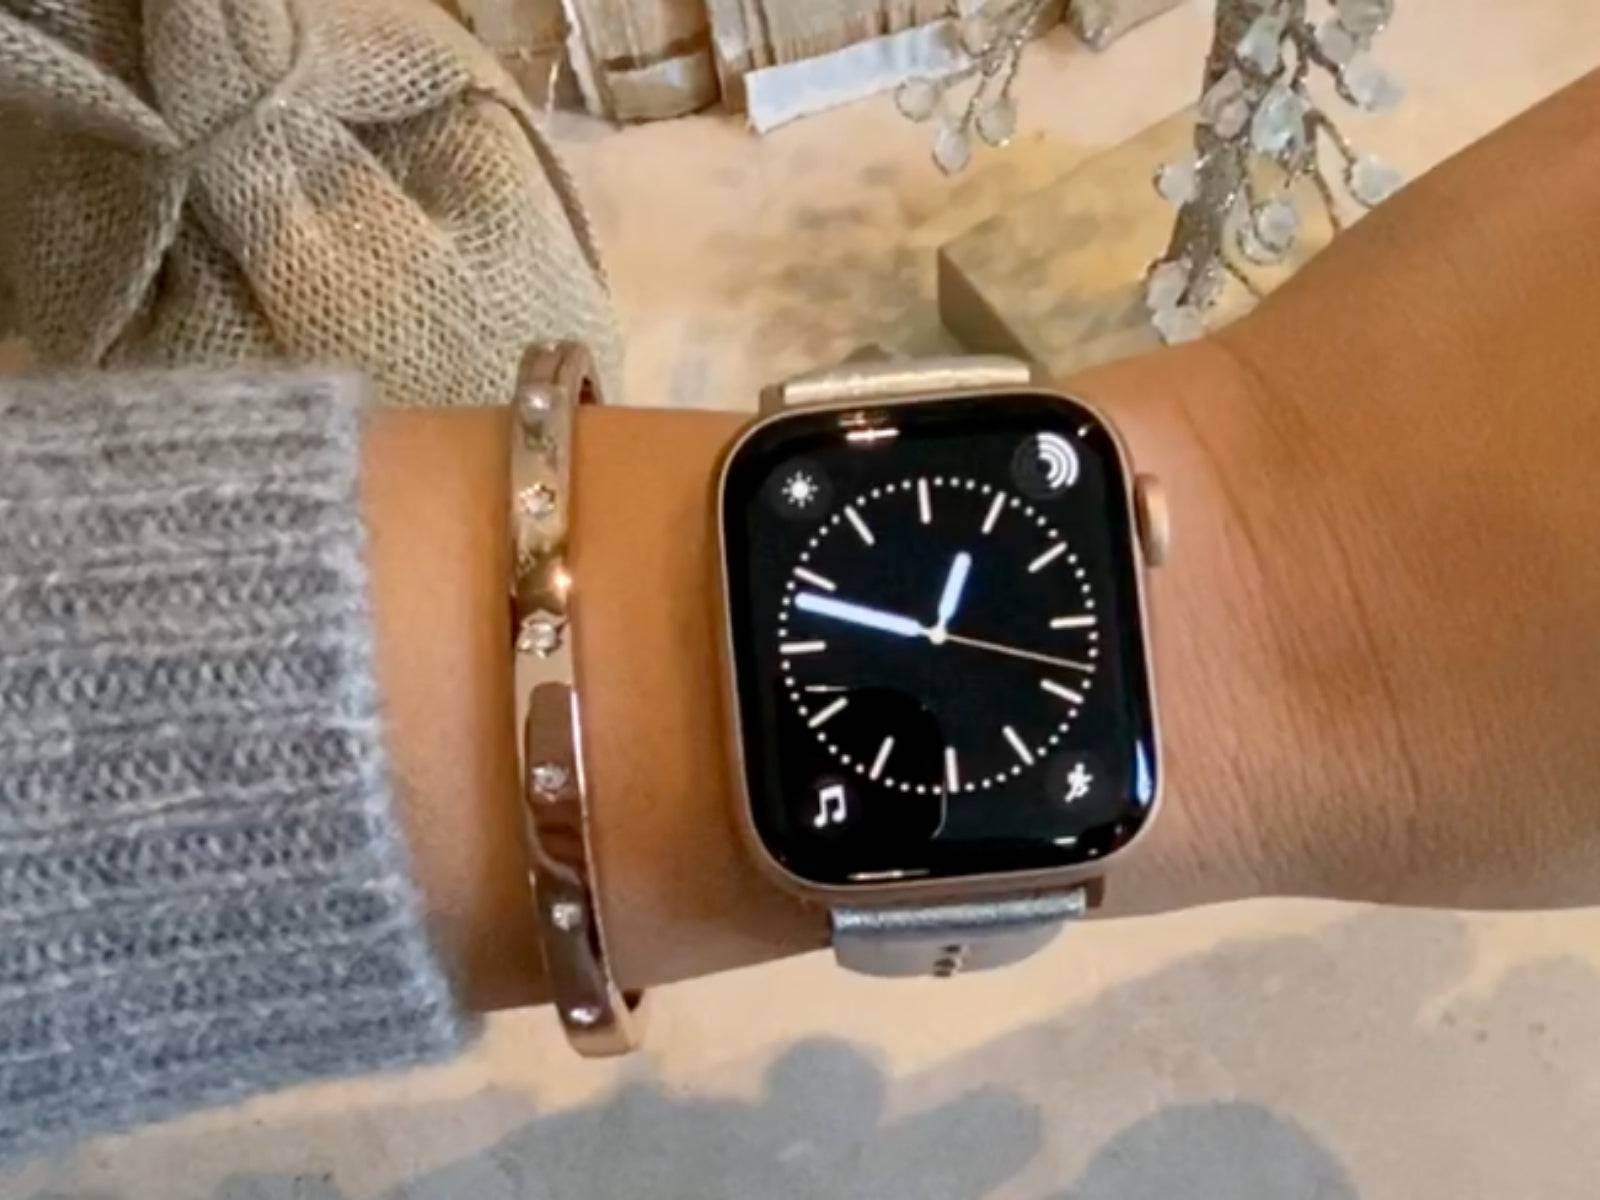 Metallic Silver Stud Band for the Apple Watch - Goldenerre Women's Apple Watch Bands and Jewelry